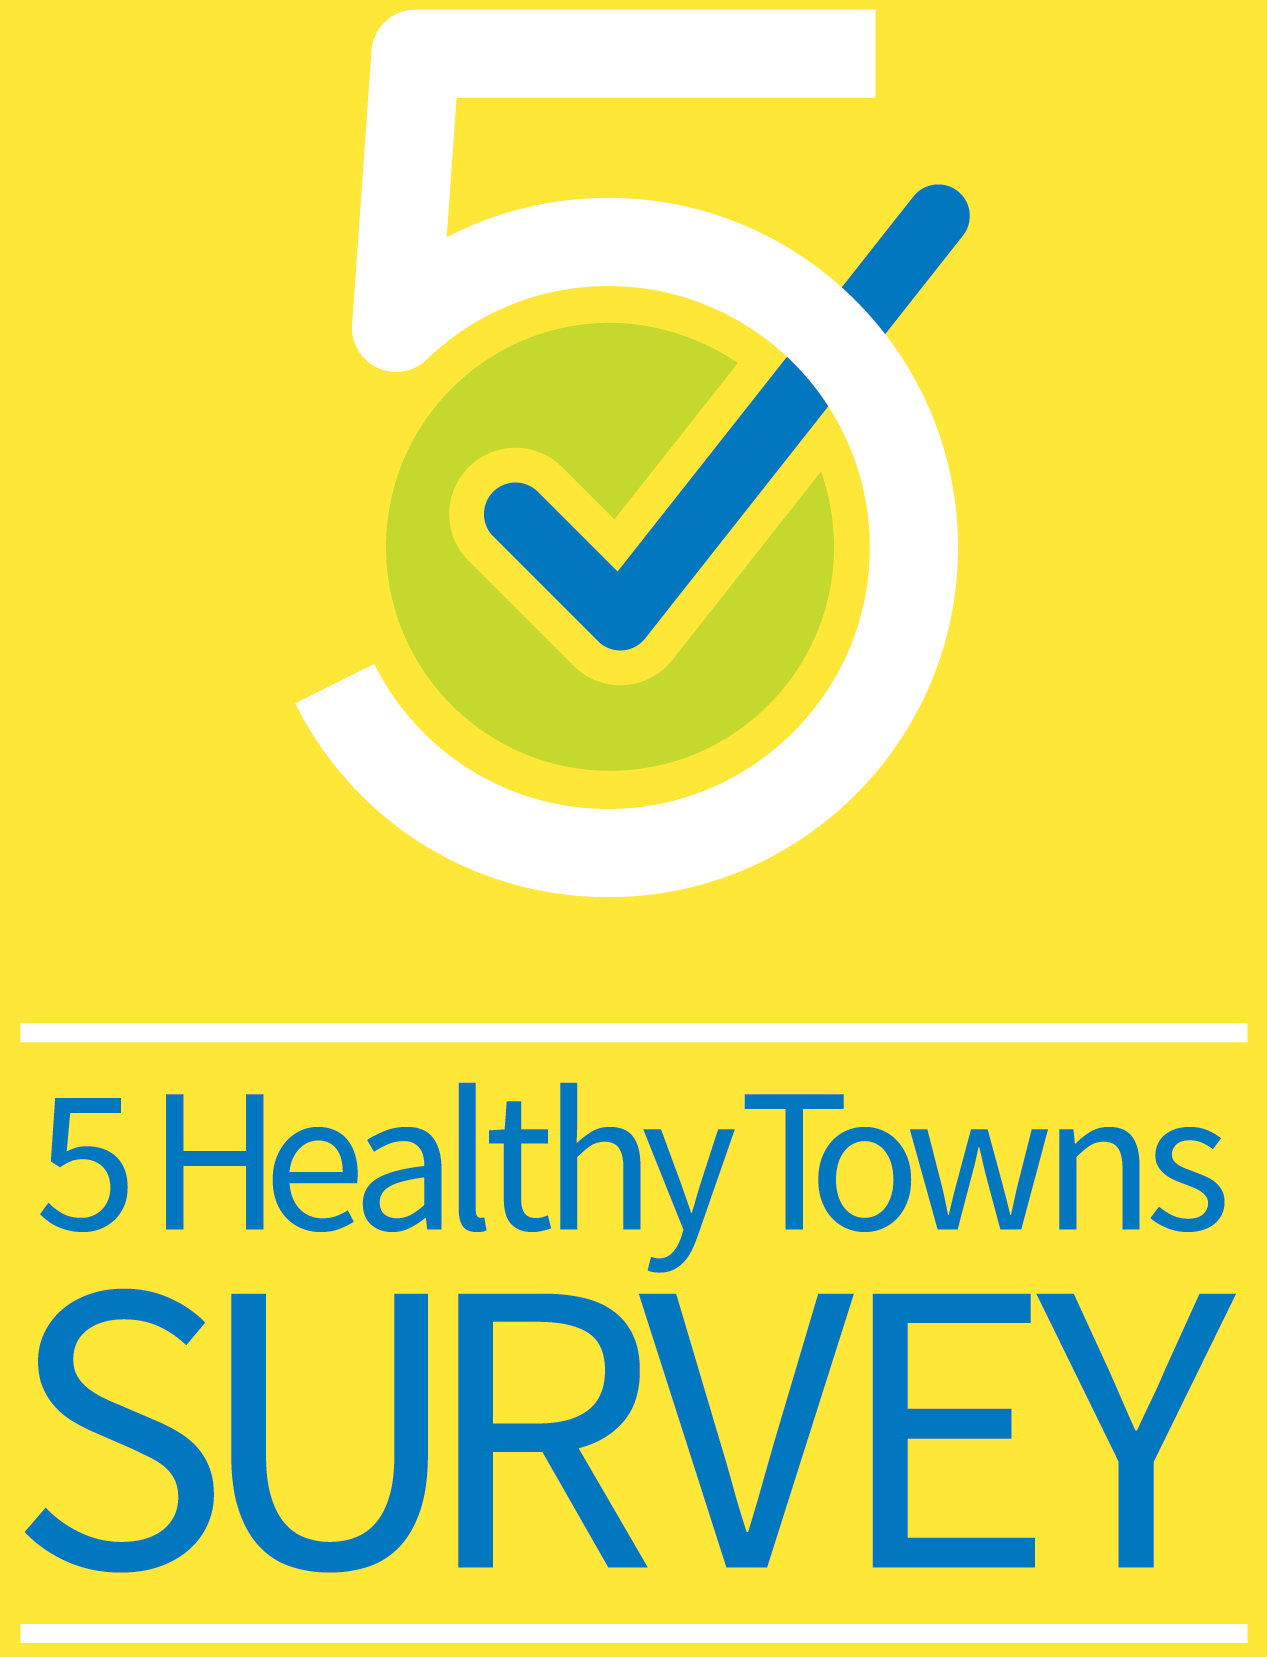 5 Healthy Towns Survey